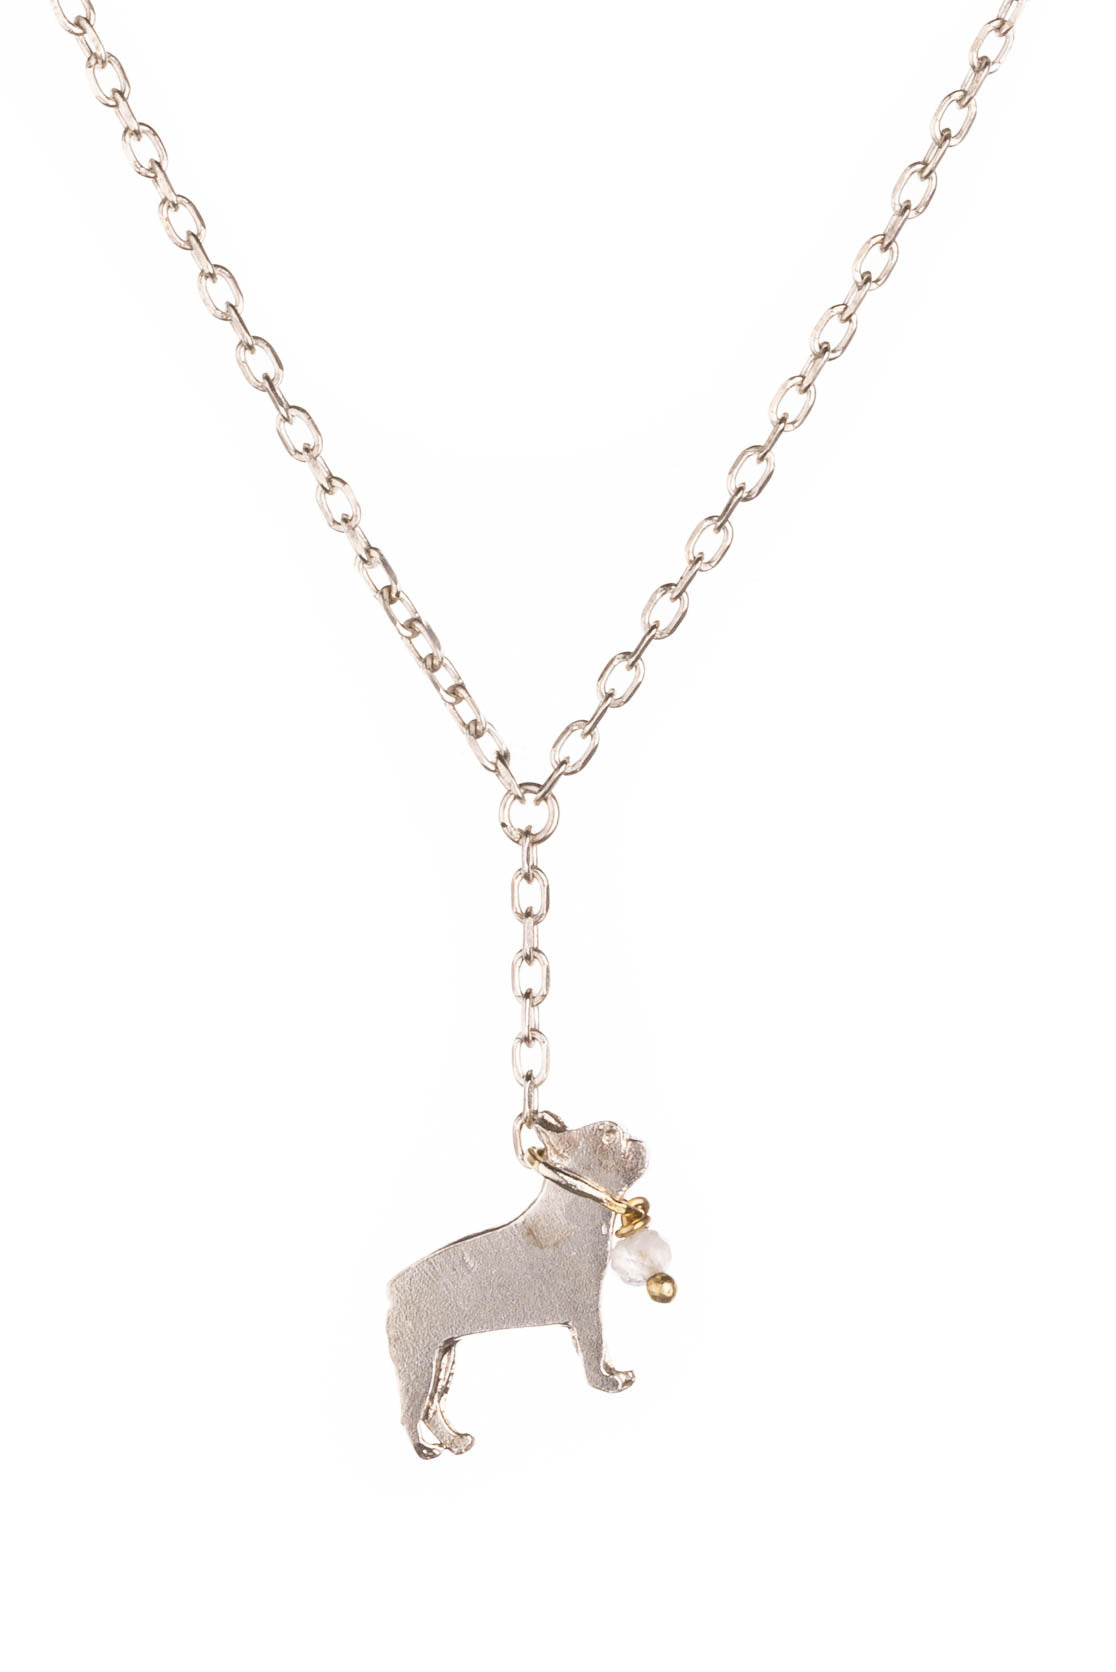 French bulldog on a lead necklace